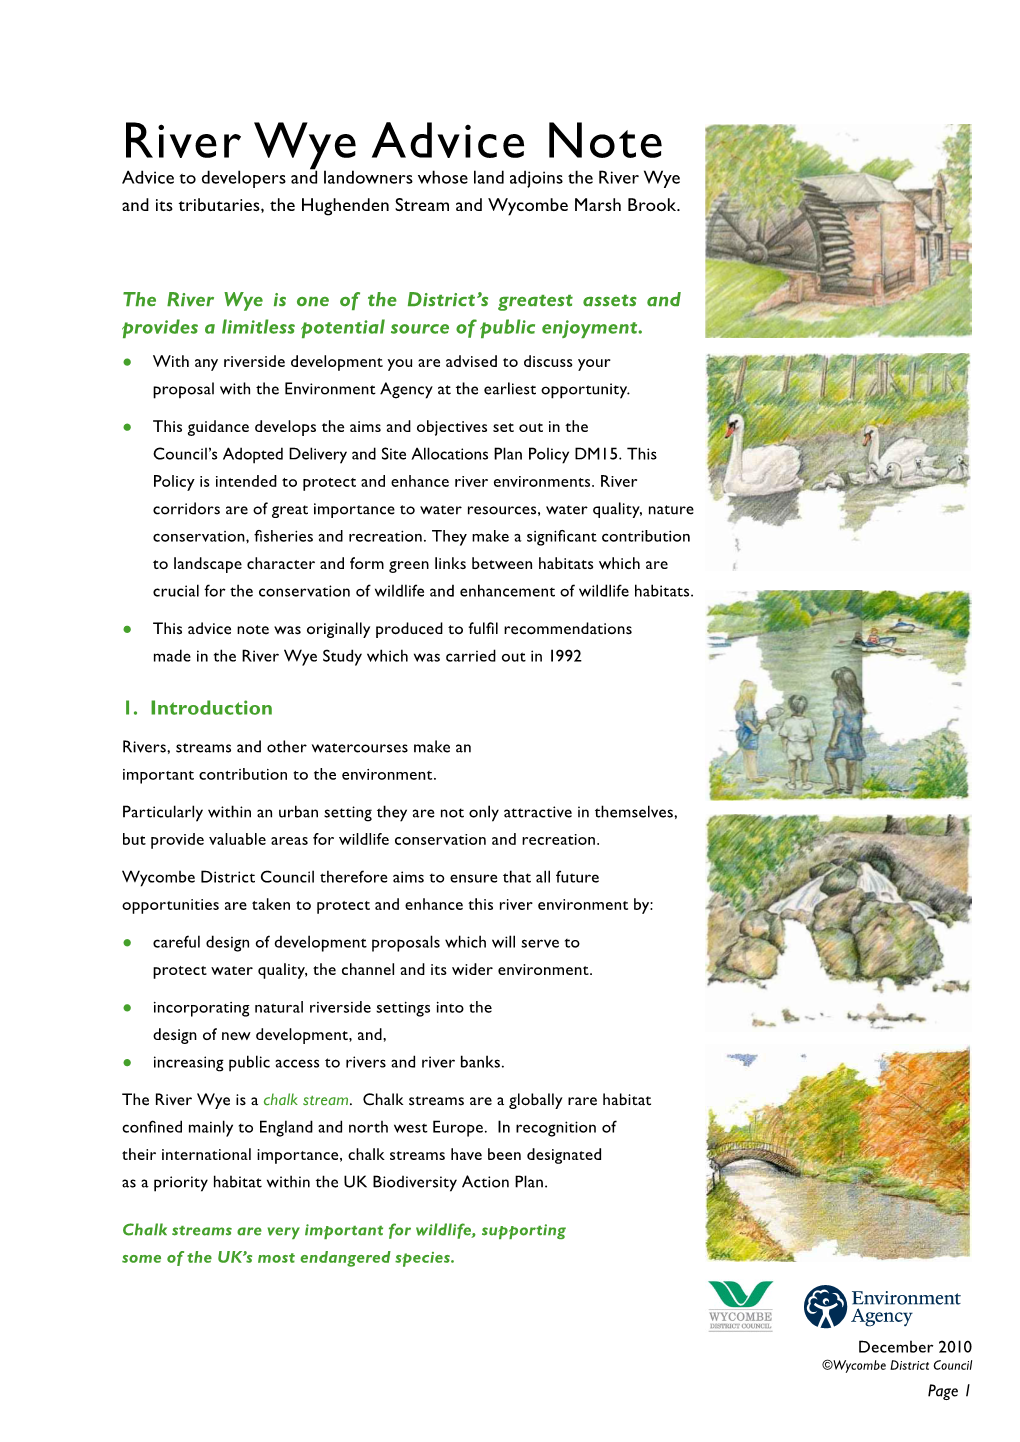 River Wye Advice Note Advice to Developers and Landowners Whose Land Adjoins the River Wye and Its Tributaries, the Hughenden Stream and Wycombe Marsh Brook